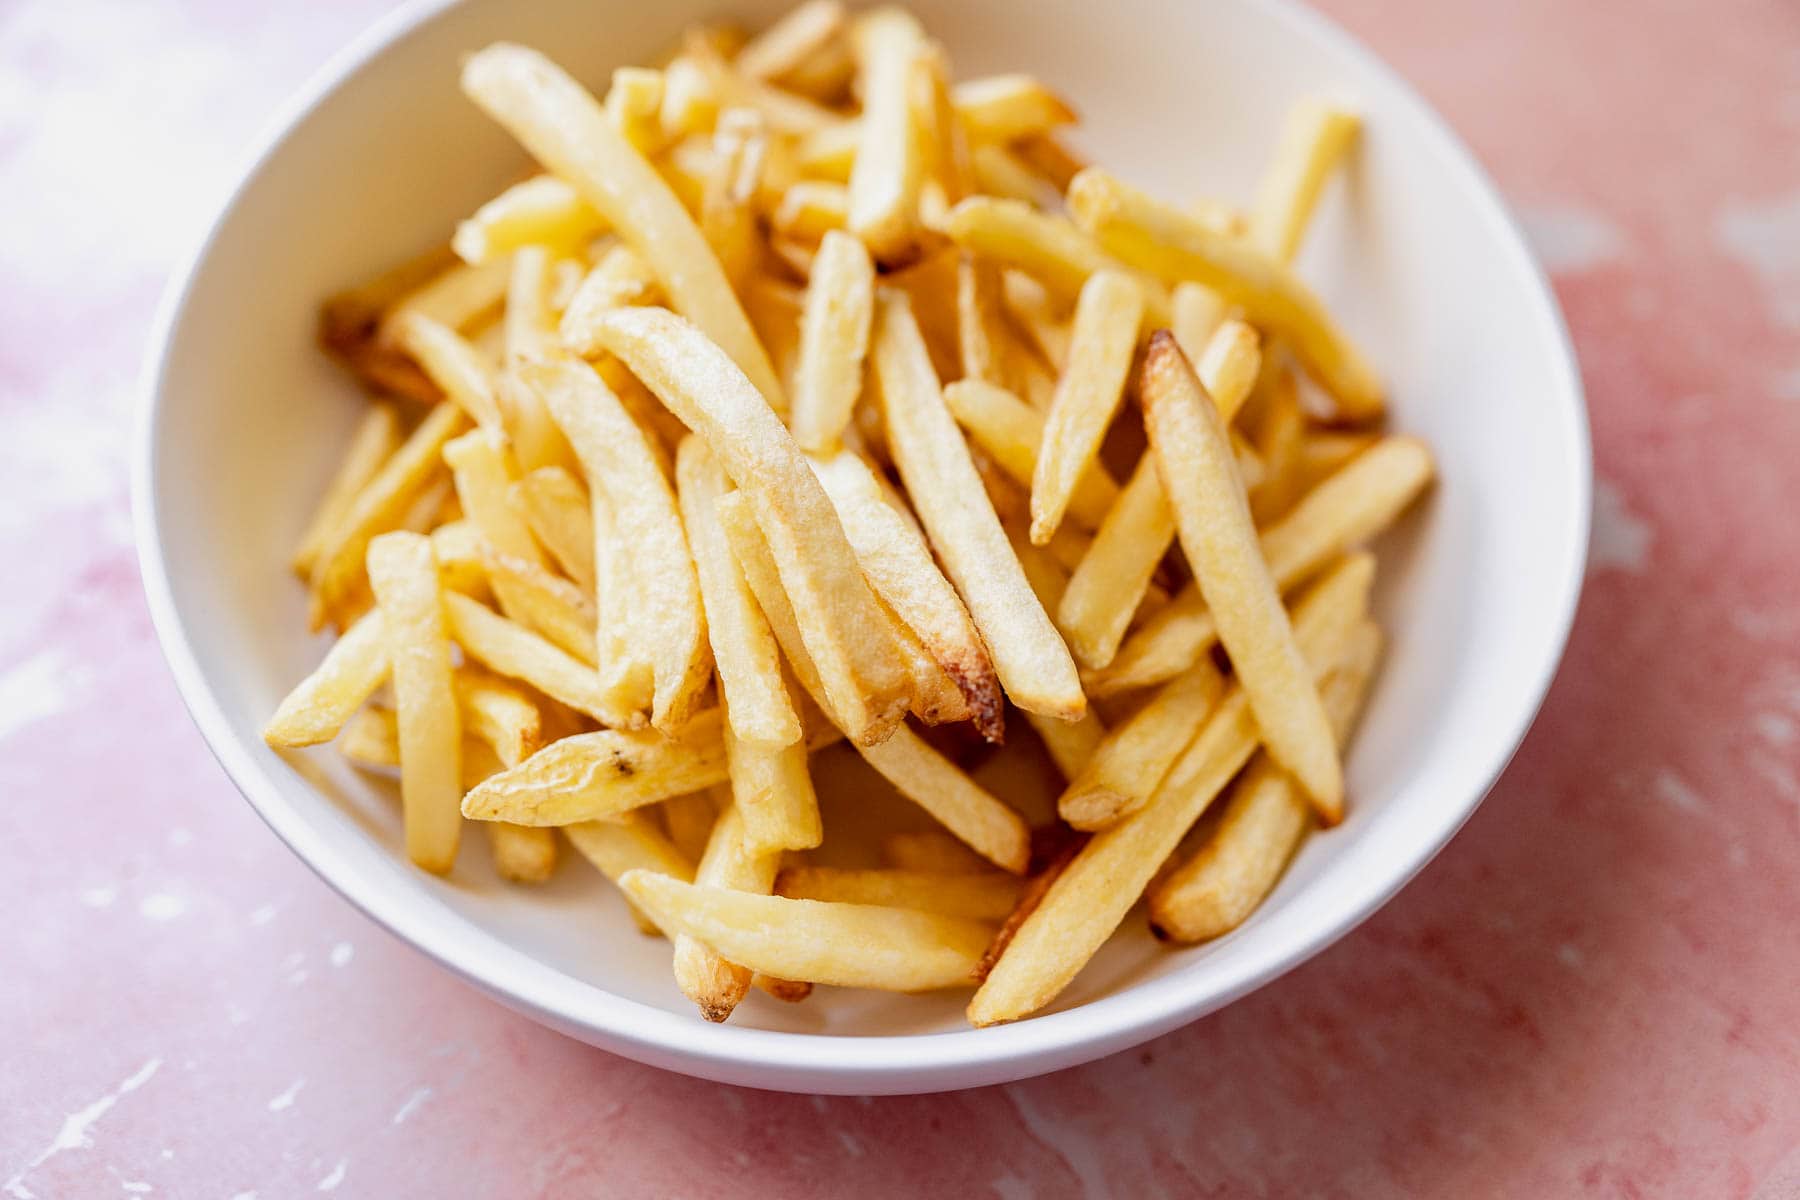 A bowl of golden-brown air fryer frozen french fries on a pink surface.